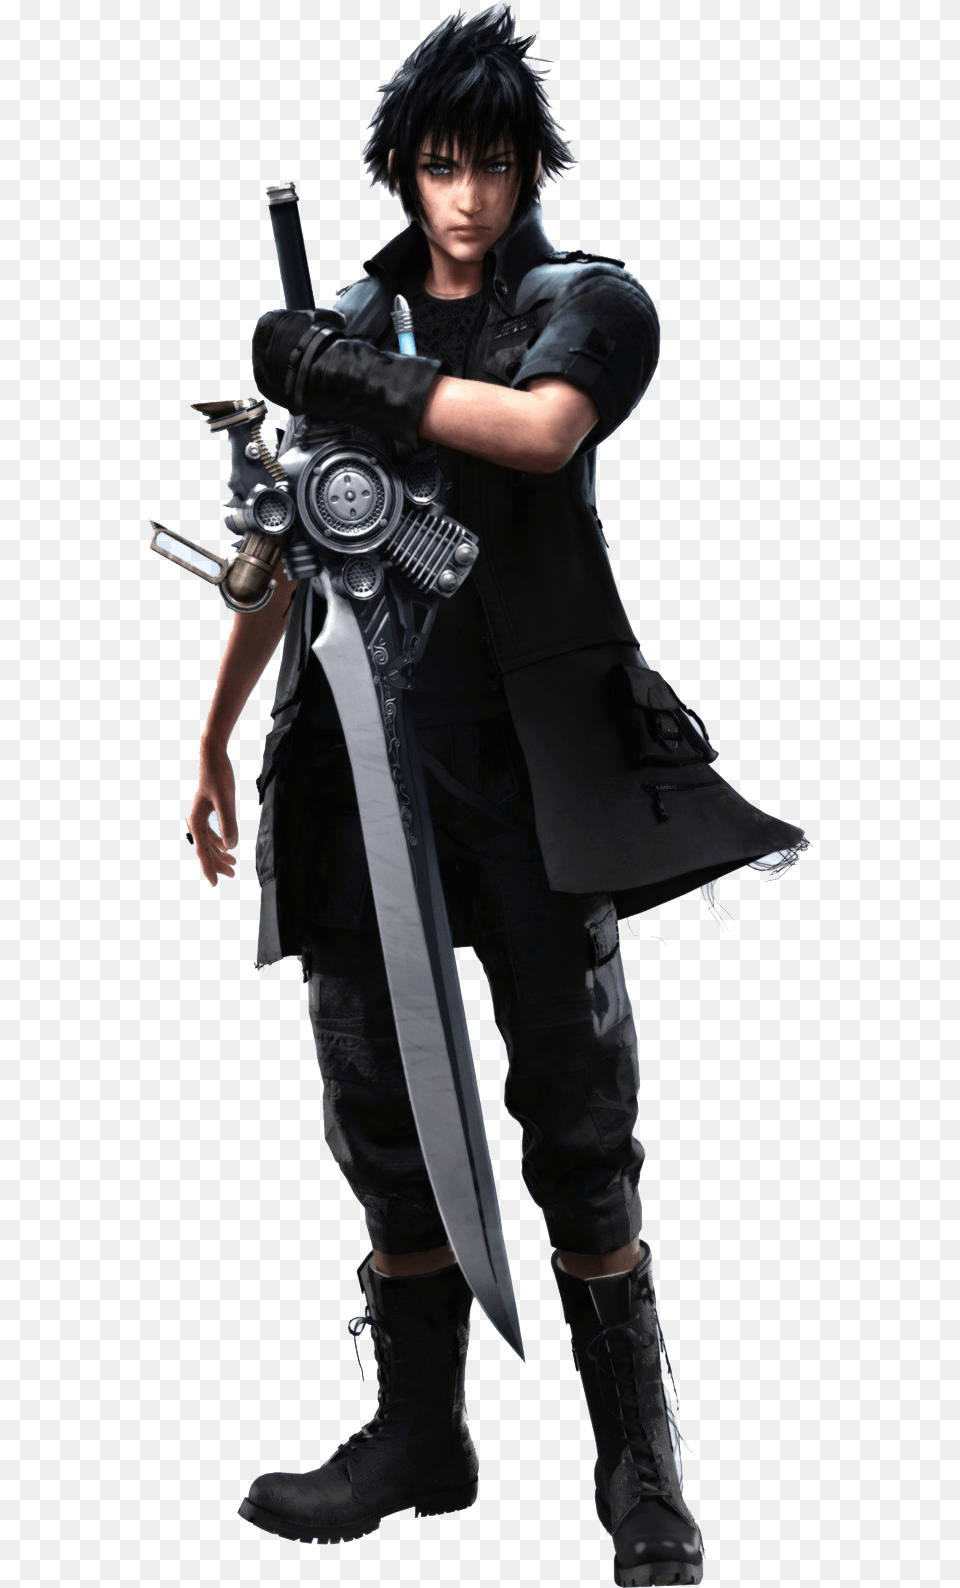 Final Fantasy Image Transparent Background Final Fantasy Xv A New Empire Characters, Clothing, Costume, Person, Weapon Free Png